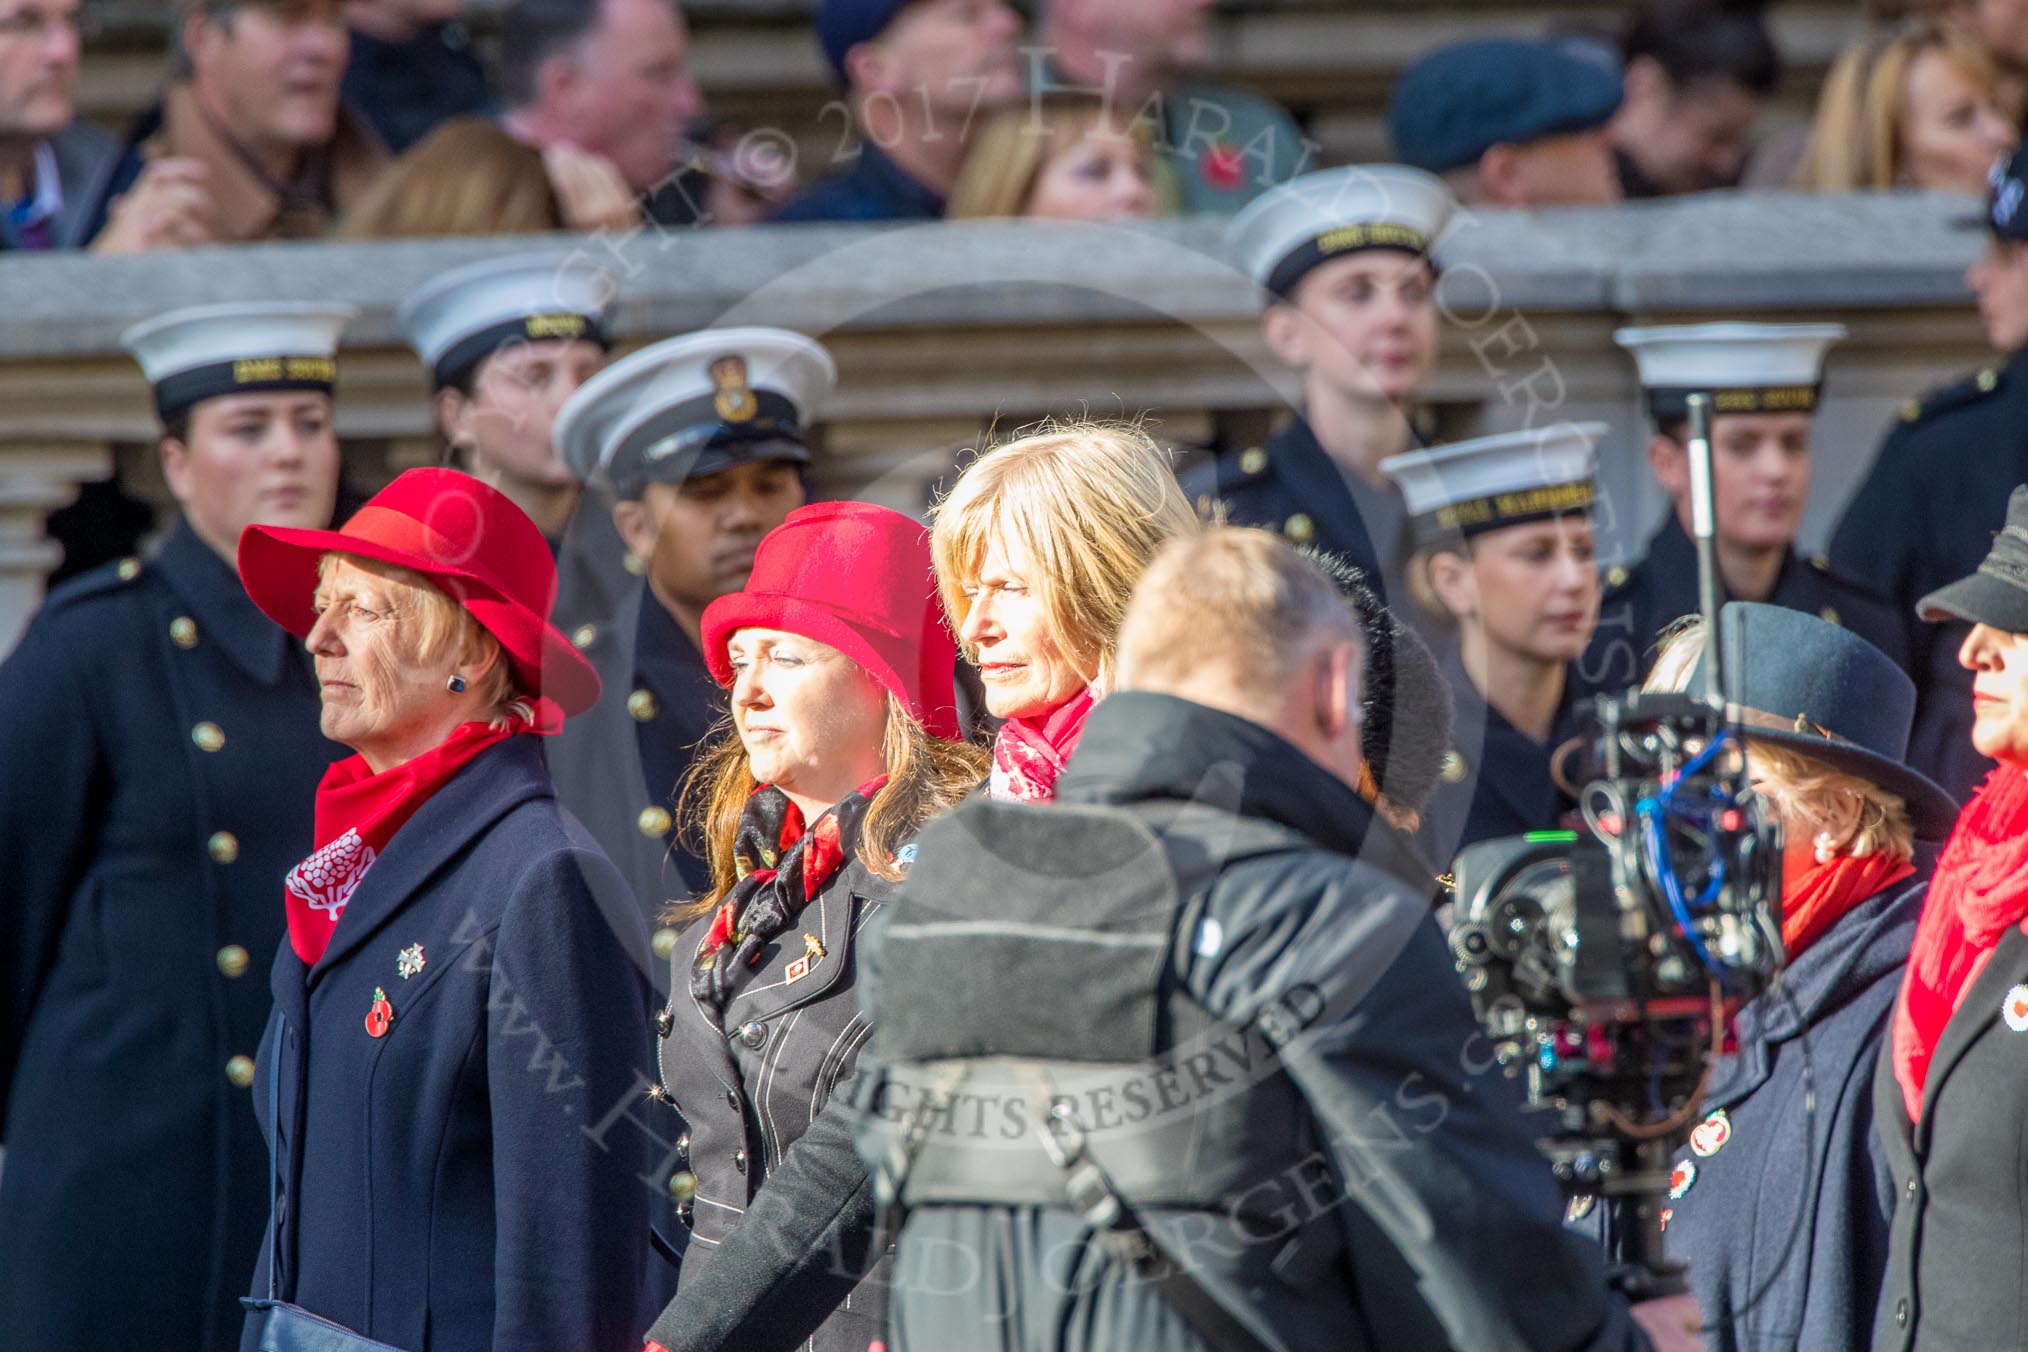 The War Widows' Association  of Great Britain (Group D7, 47 members) during the Royal British Legion March Past on Remembrance Sunday at the Cenotaph, Whitehall, Westminster, London, 11 November 2018, 12:21.